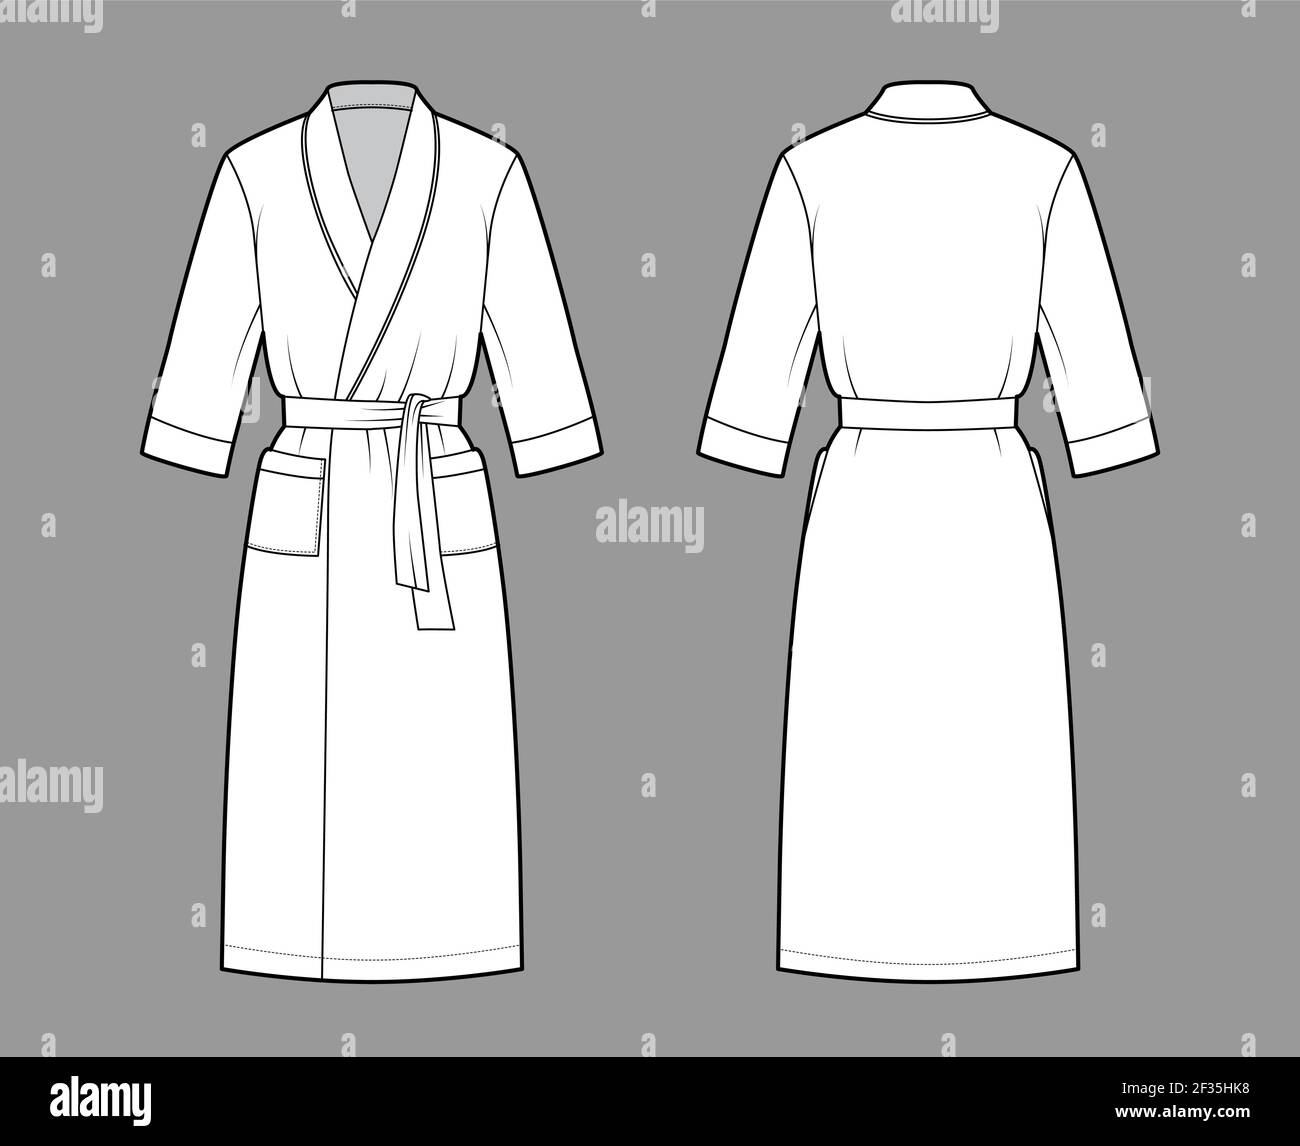 Download Bathrobe Dressing Gown Technical Fashion Illustration With Wrap Opening Knee Length Oversized Tie Pocket Elbow Sleeves Flat Apparel Front Back White Color Style Women Men Unisex Cad Mockup Stock Vector Image